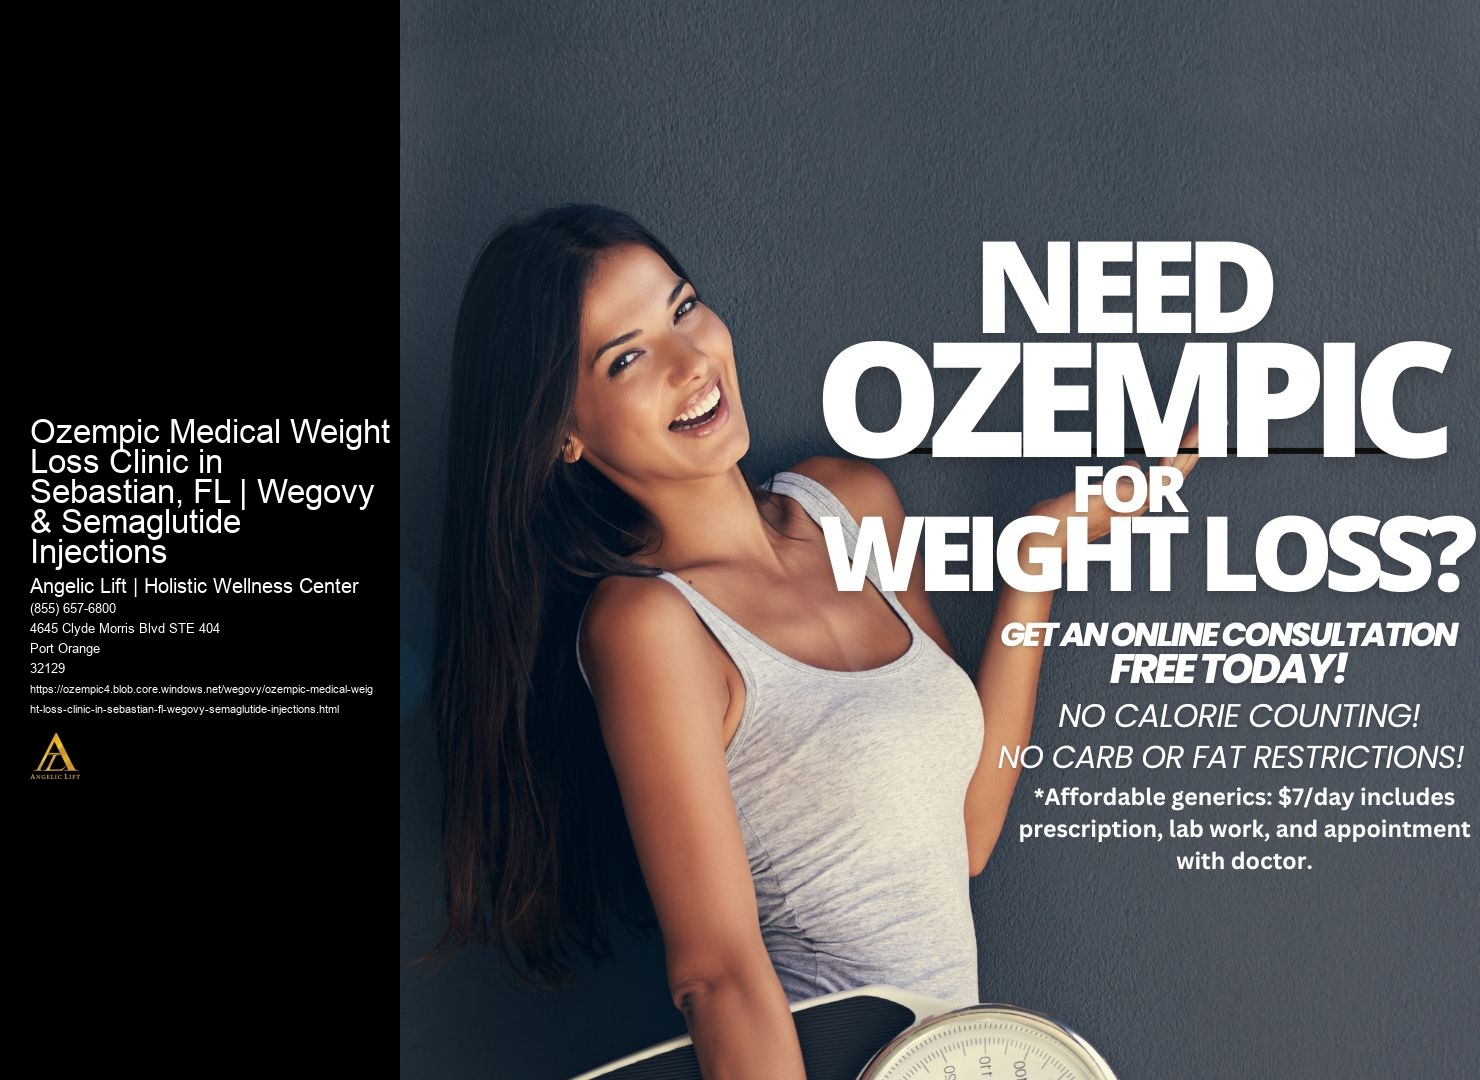 Ozempic Medical Weight Loss Clinic in Sebastian, FL | Wegovy & Semaglutide Injections